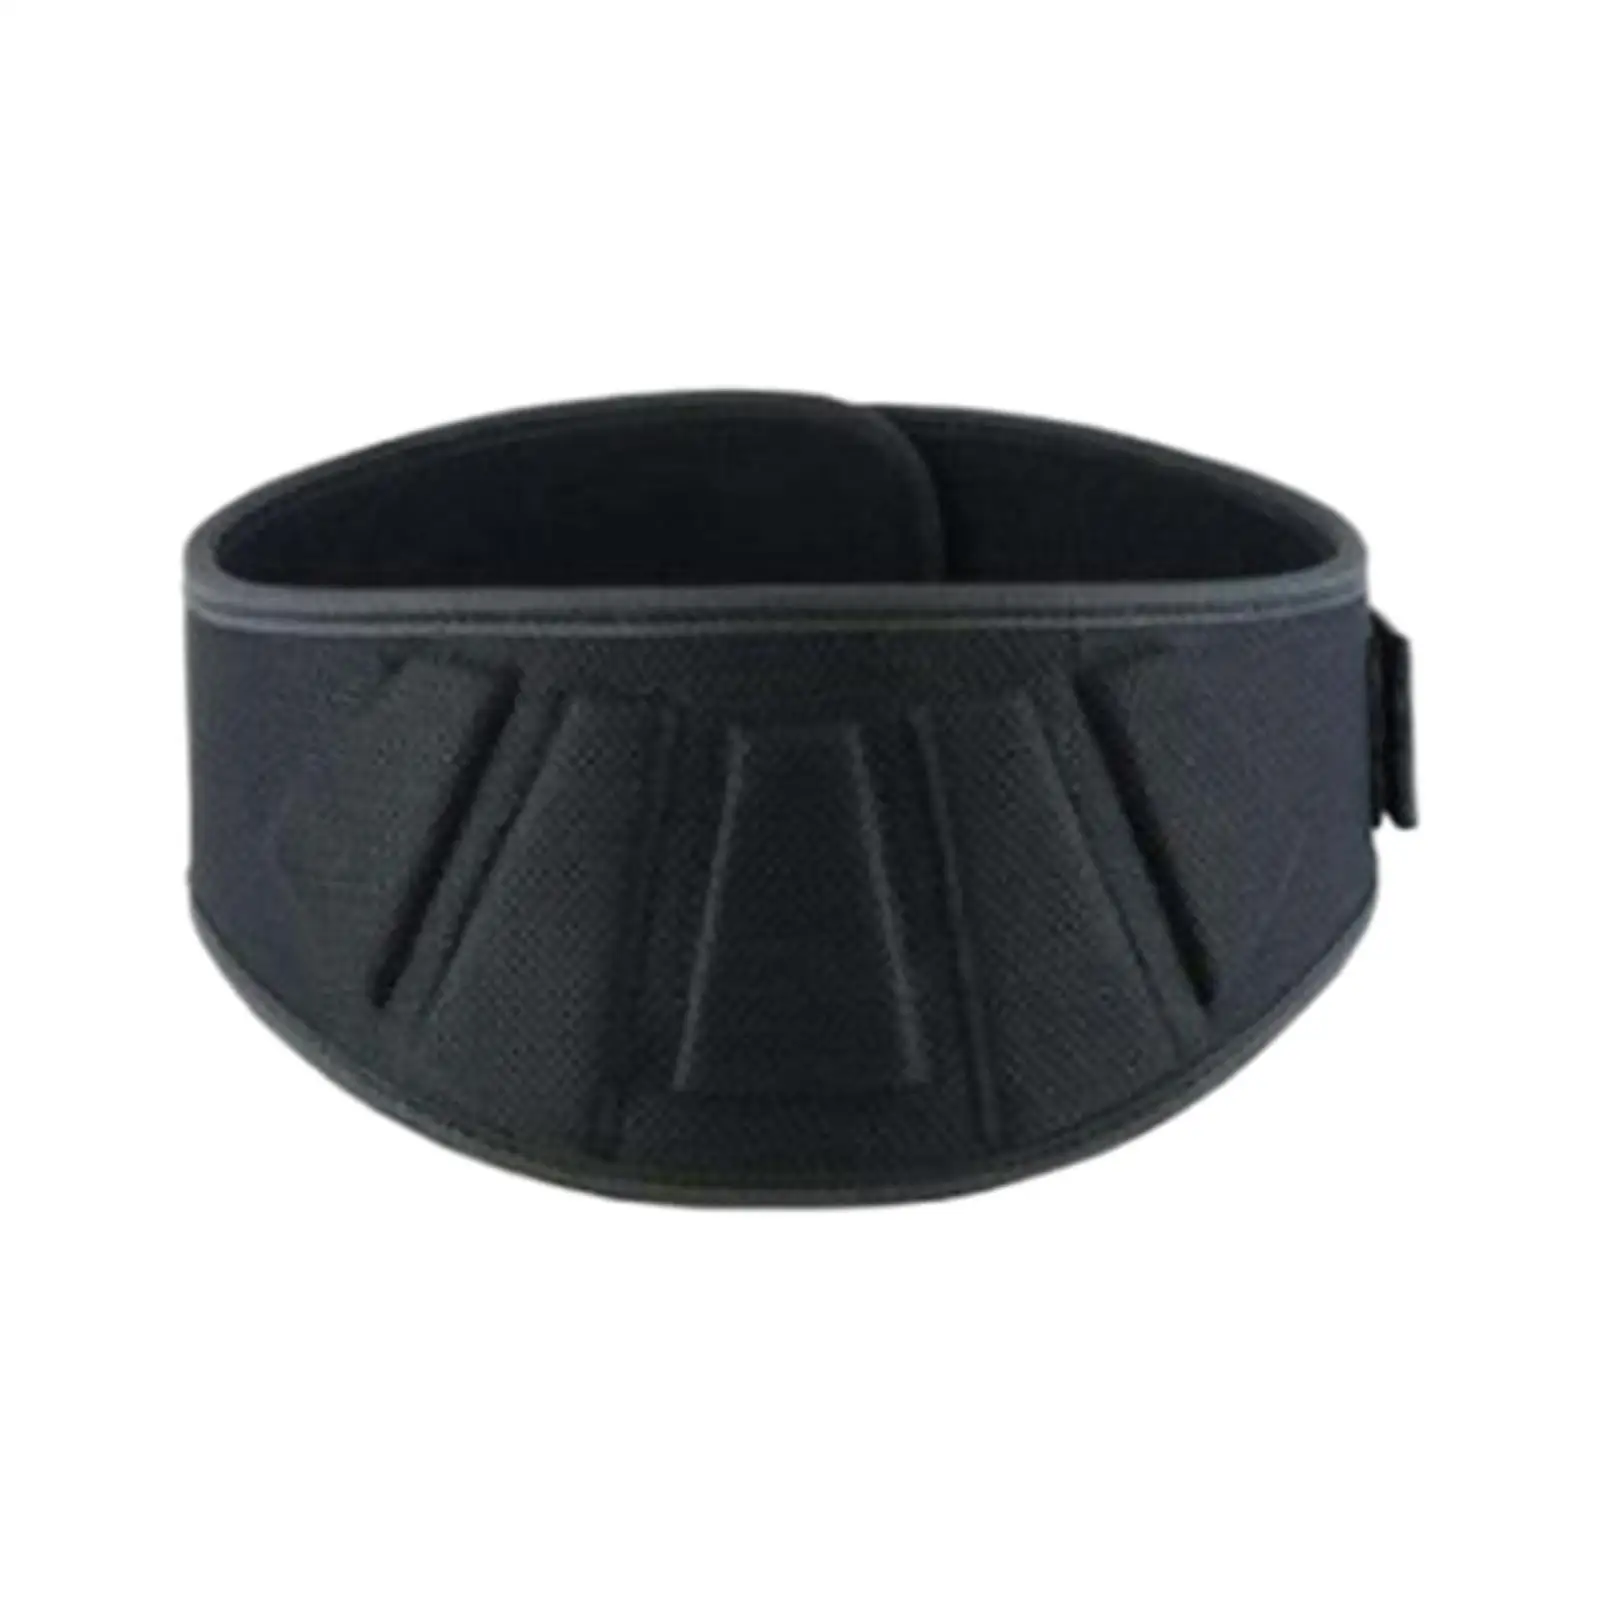 Weight Lifting Belt Powerlifting Support Fitness Weightlifting Belt for Deadlift